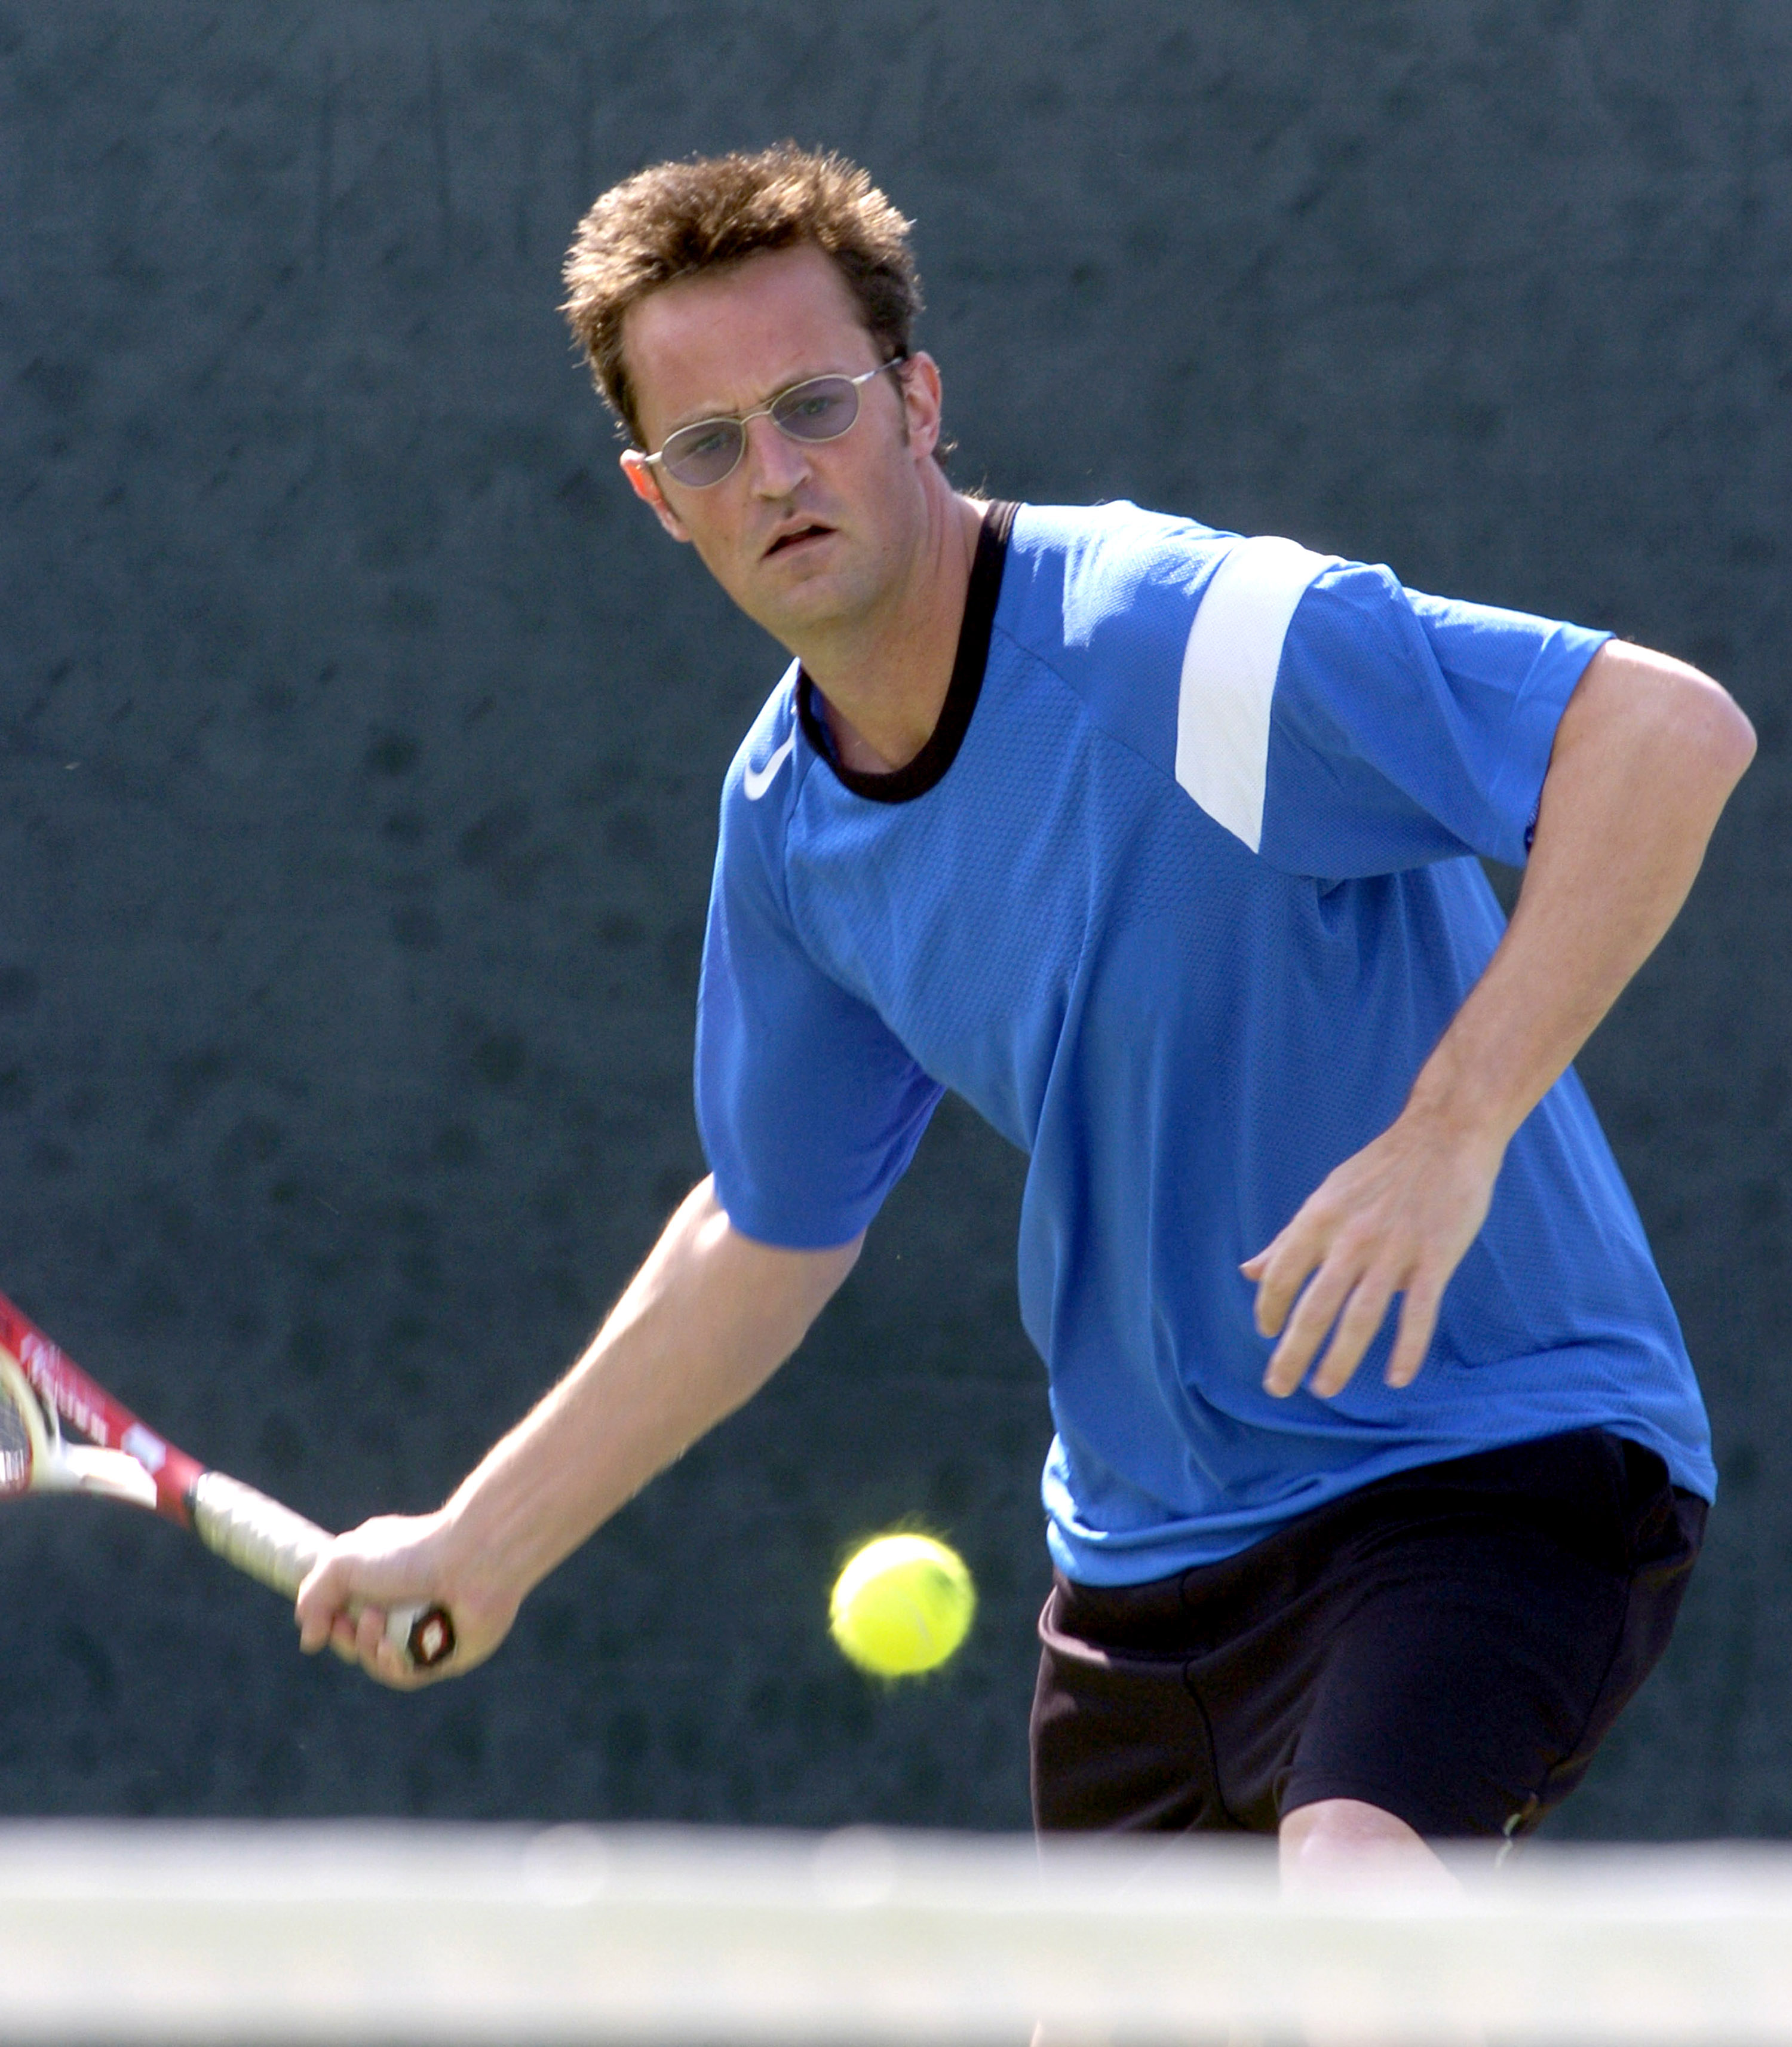 Matthew Perry during The Cystic Fibrosis 19th Annual Celebrity Tennis Tournament To Fund Research Toward A Cure in Manhattan Beach, California on October 24, 2004 | Source: Getty Images